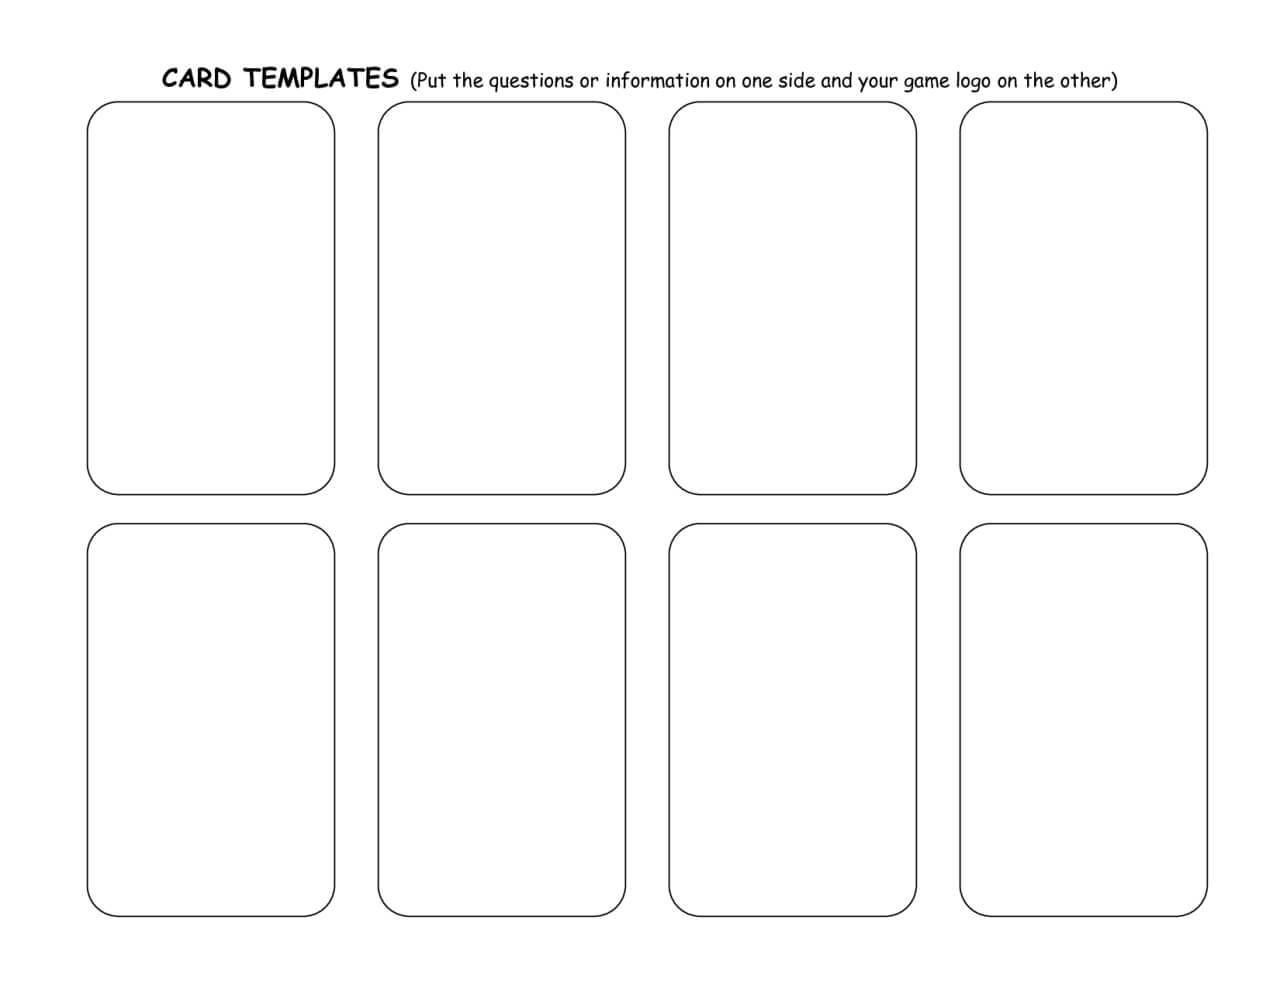 Trading Card Game Template - Free Download In 2019 | Trading Inside Playing Card Template Word